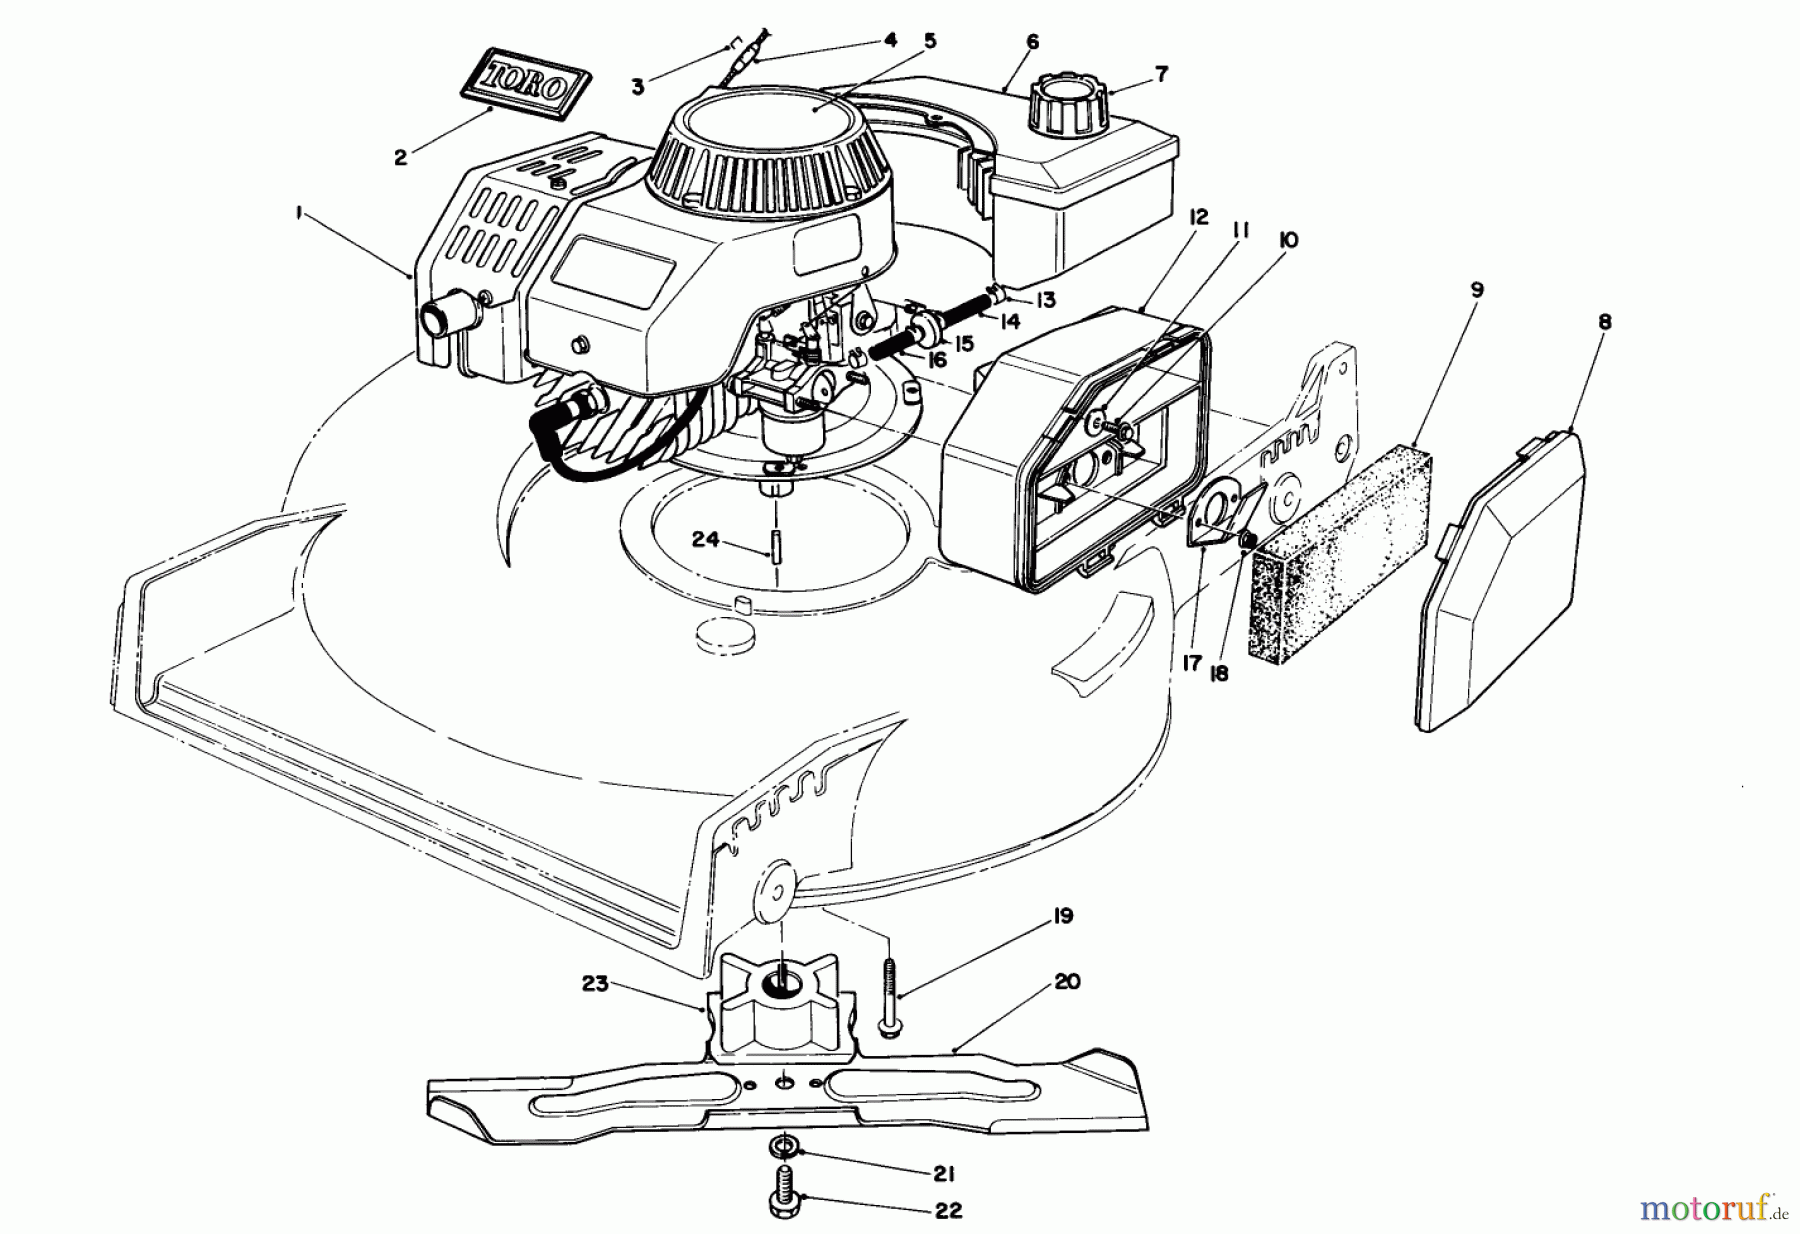  Toro Neu Mowers, Walk-Behind Seite 1 20581 - Toro Lawnmower, 1987 (7000001-7999999) ENGINE ASSEMBLY (MODEL NO. 47PG6) (USED ON UNITS WITH SERIAL NO. 7001111 & UP)